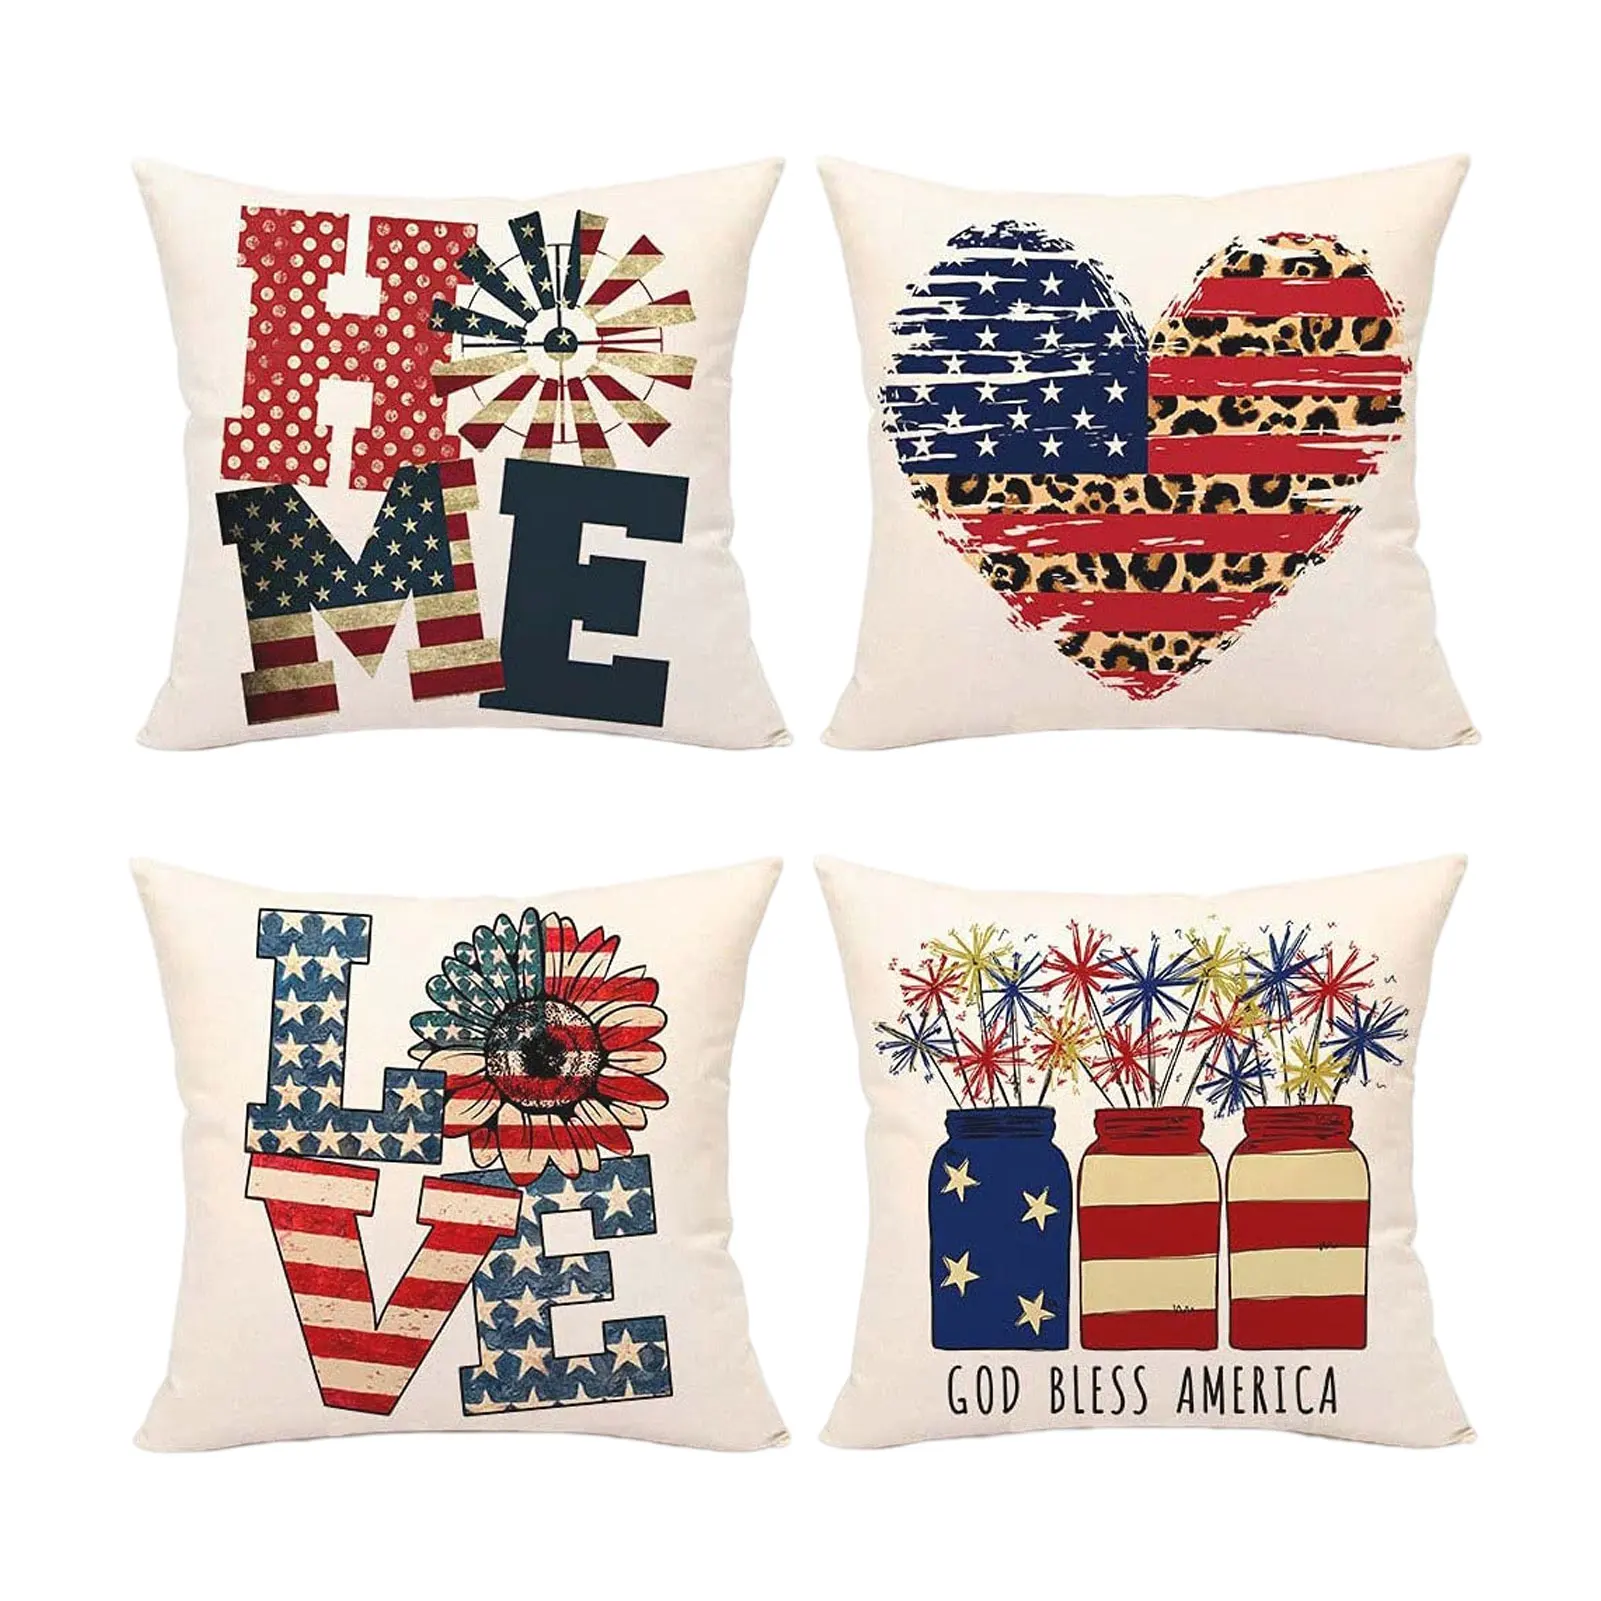 4th of July USA Independence Day Cushion Cover Home Decor American Flag Pillows Cover Office Sofa Throw Pillows Case 45x45cm